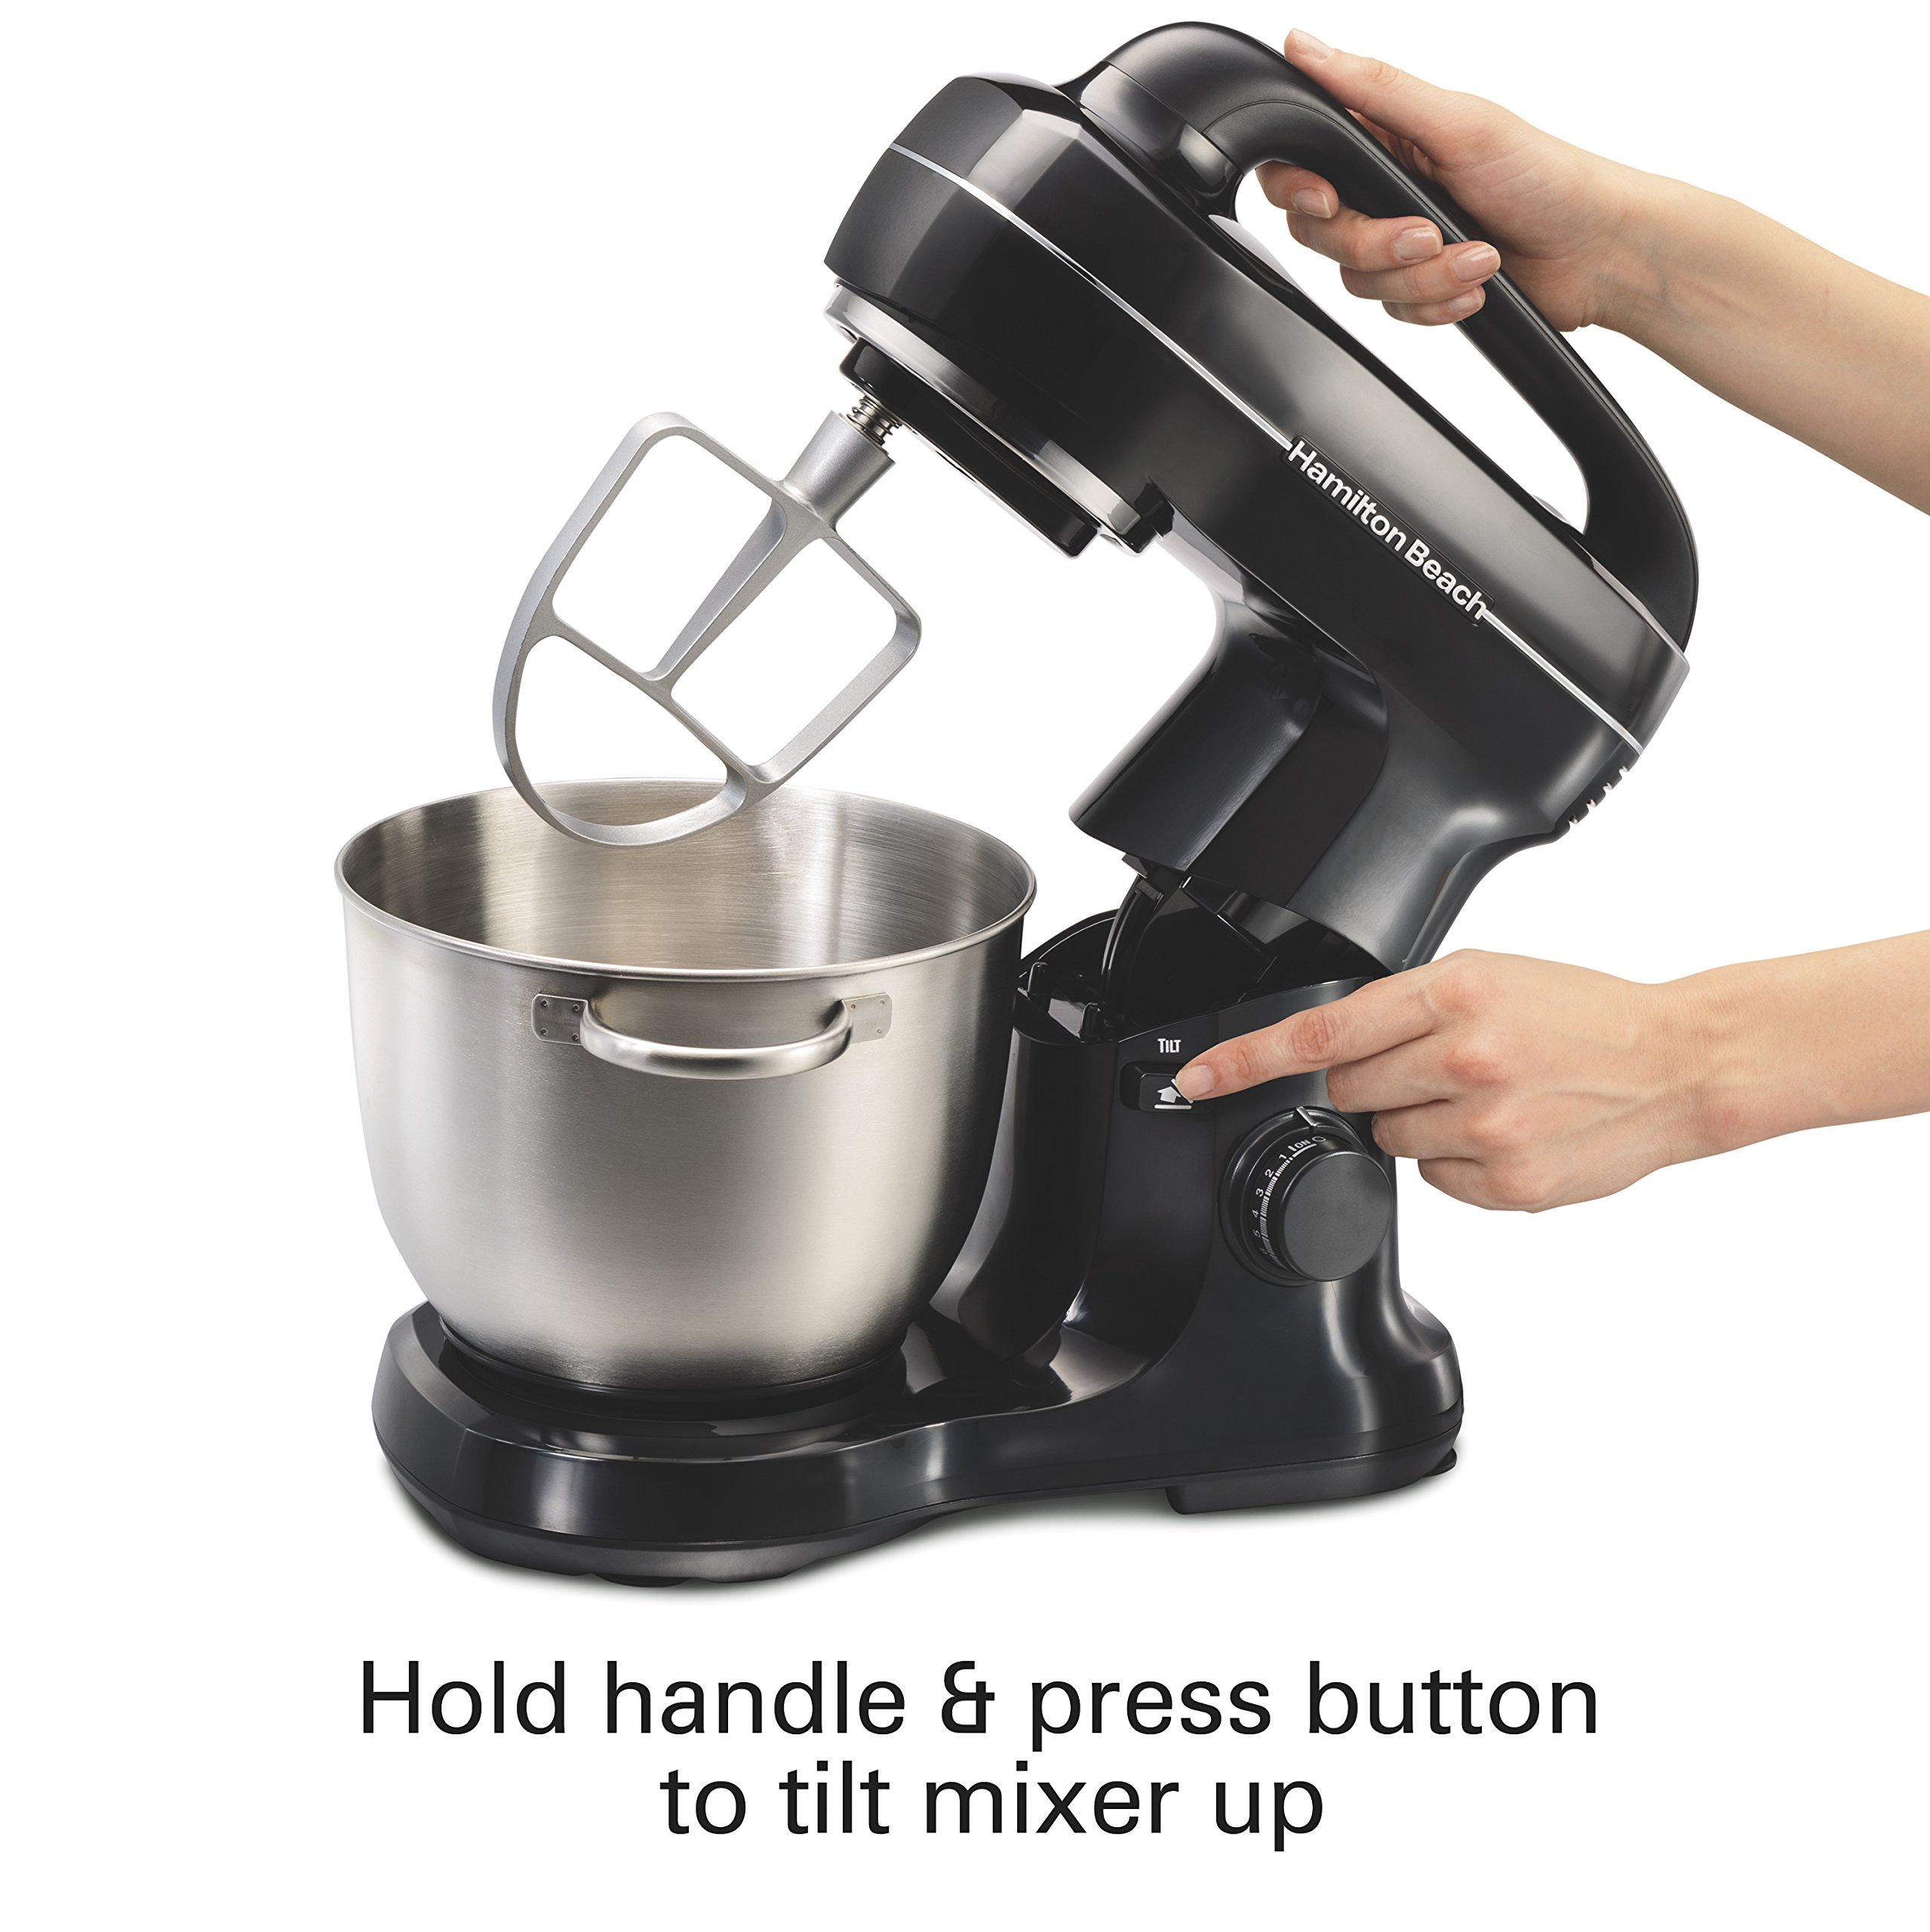 Hamilton Beach 63391 Stand Mixer, 7 Speeds with Whisk, Dough Hook, Flat Beater Attachments, 4 Quart, Black - image 4 of 7